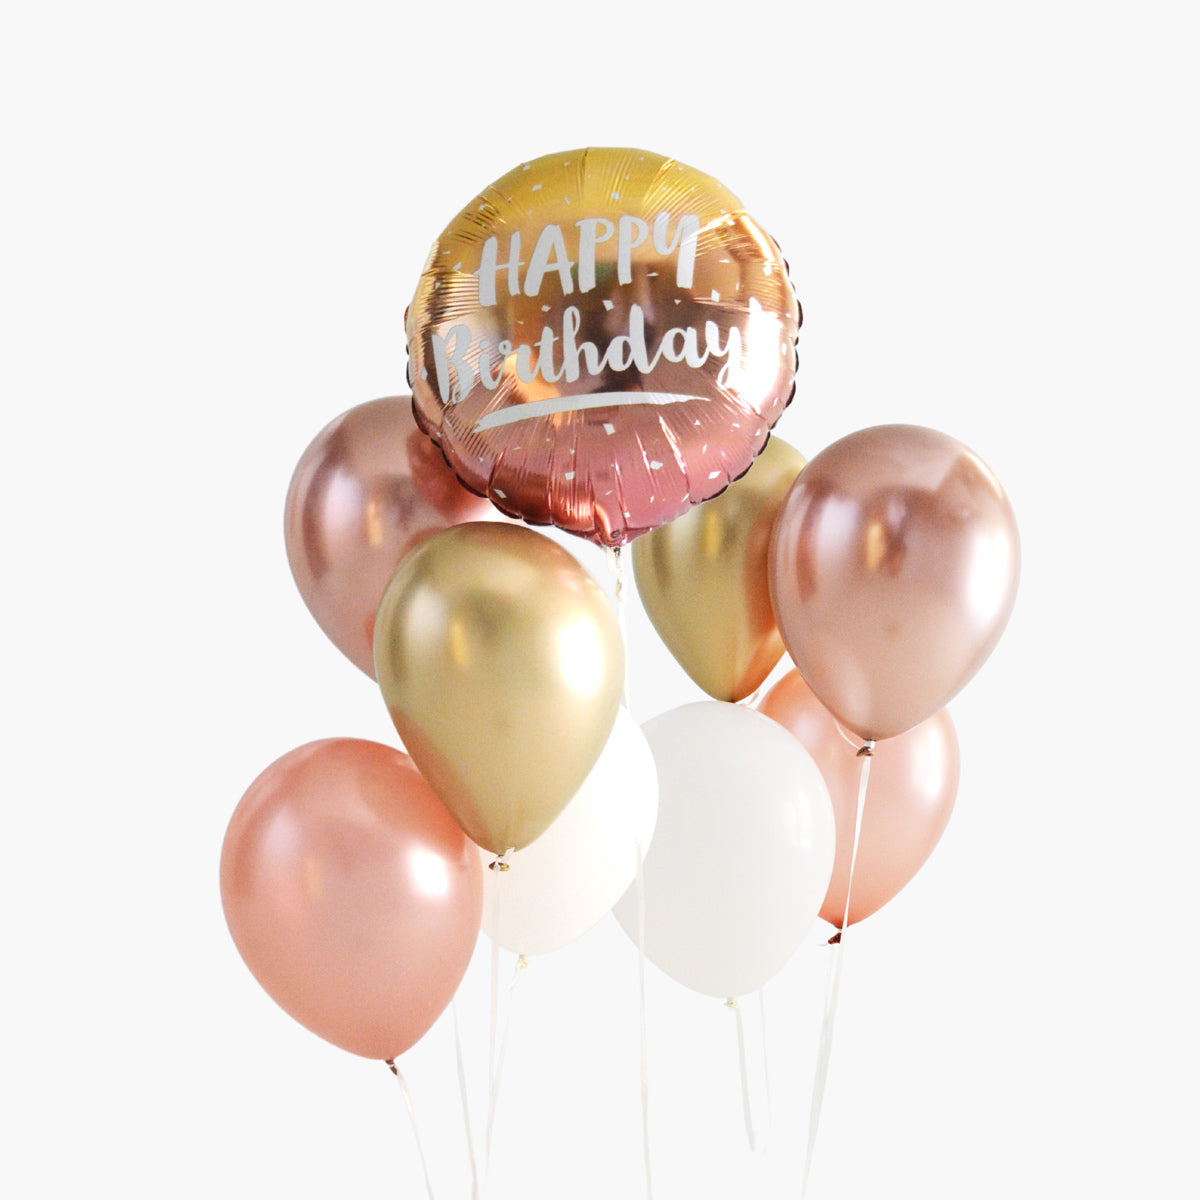 Rose Gold and Gold Happy Birthday Balloon Bouquet - Modern Birthday Party Decorations for Girls